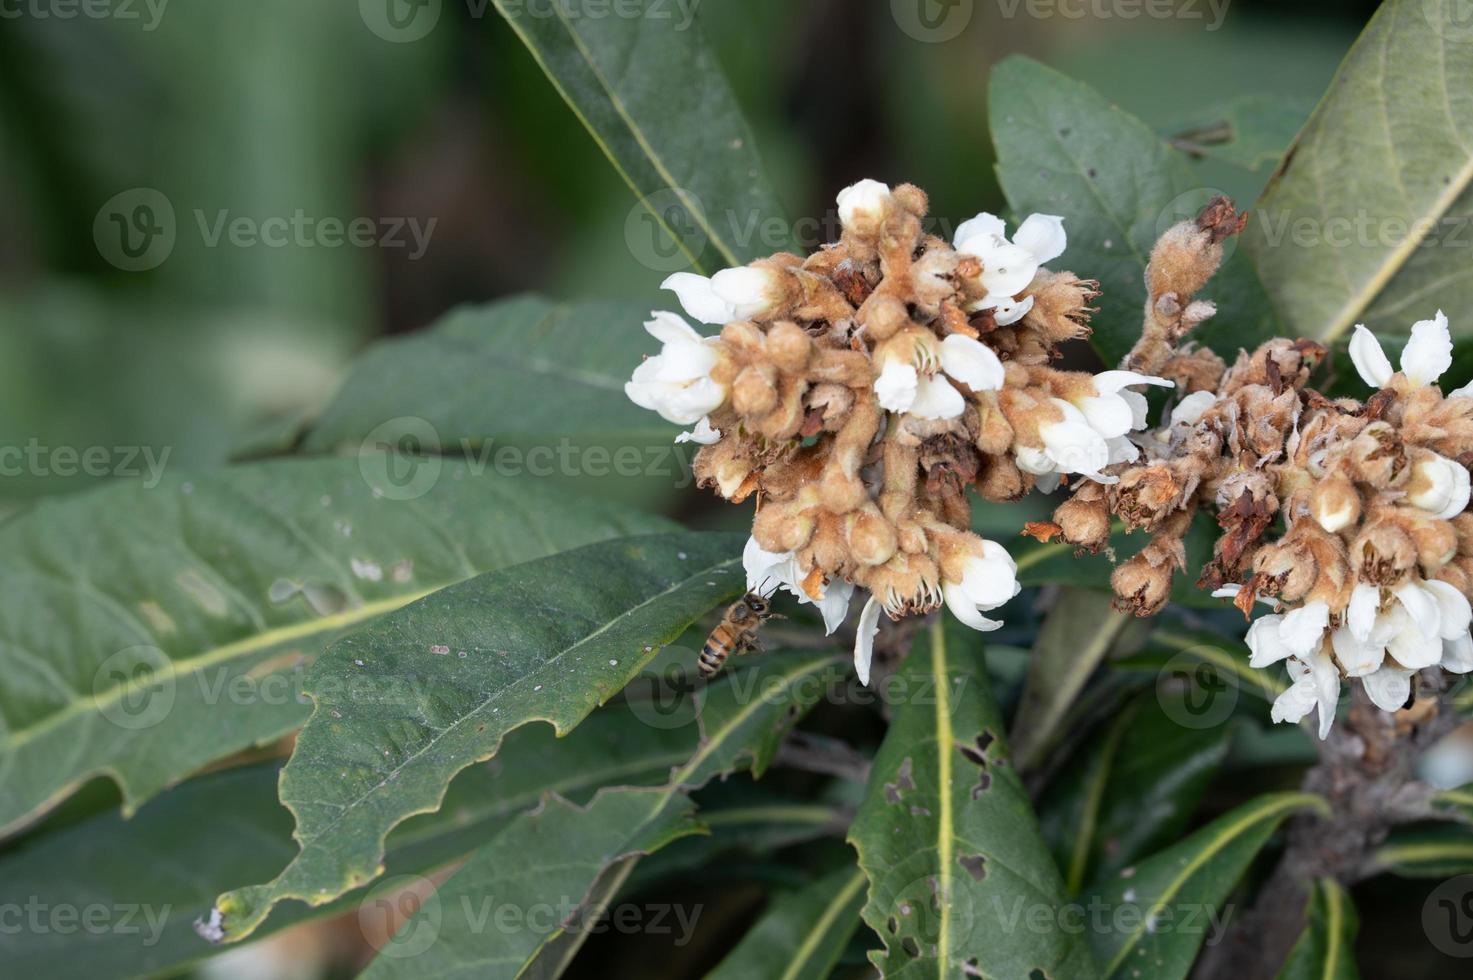 The Yellow loquat flowers on the loquat leaves bloom, and some bees collect honey on them photo